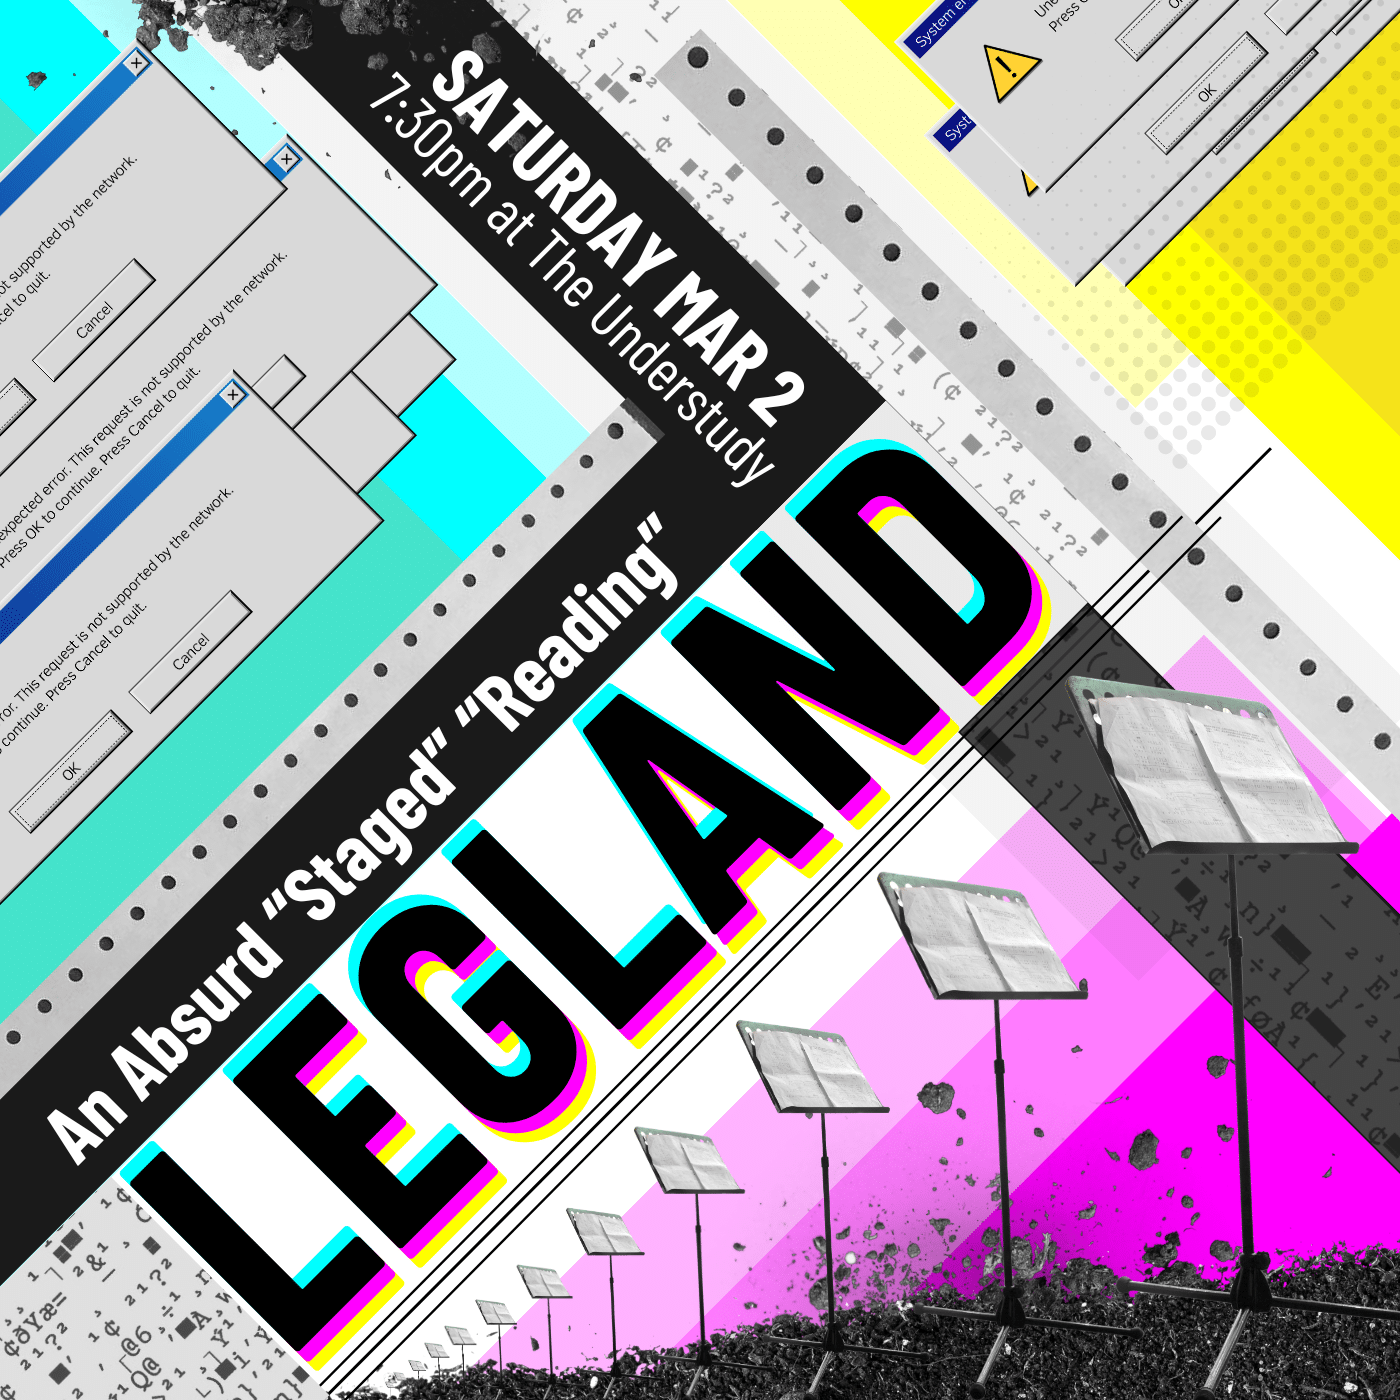 Legland: An Absurd “Staged” Reading